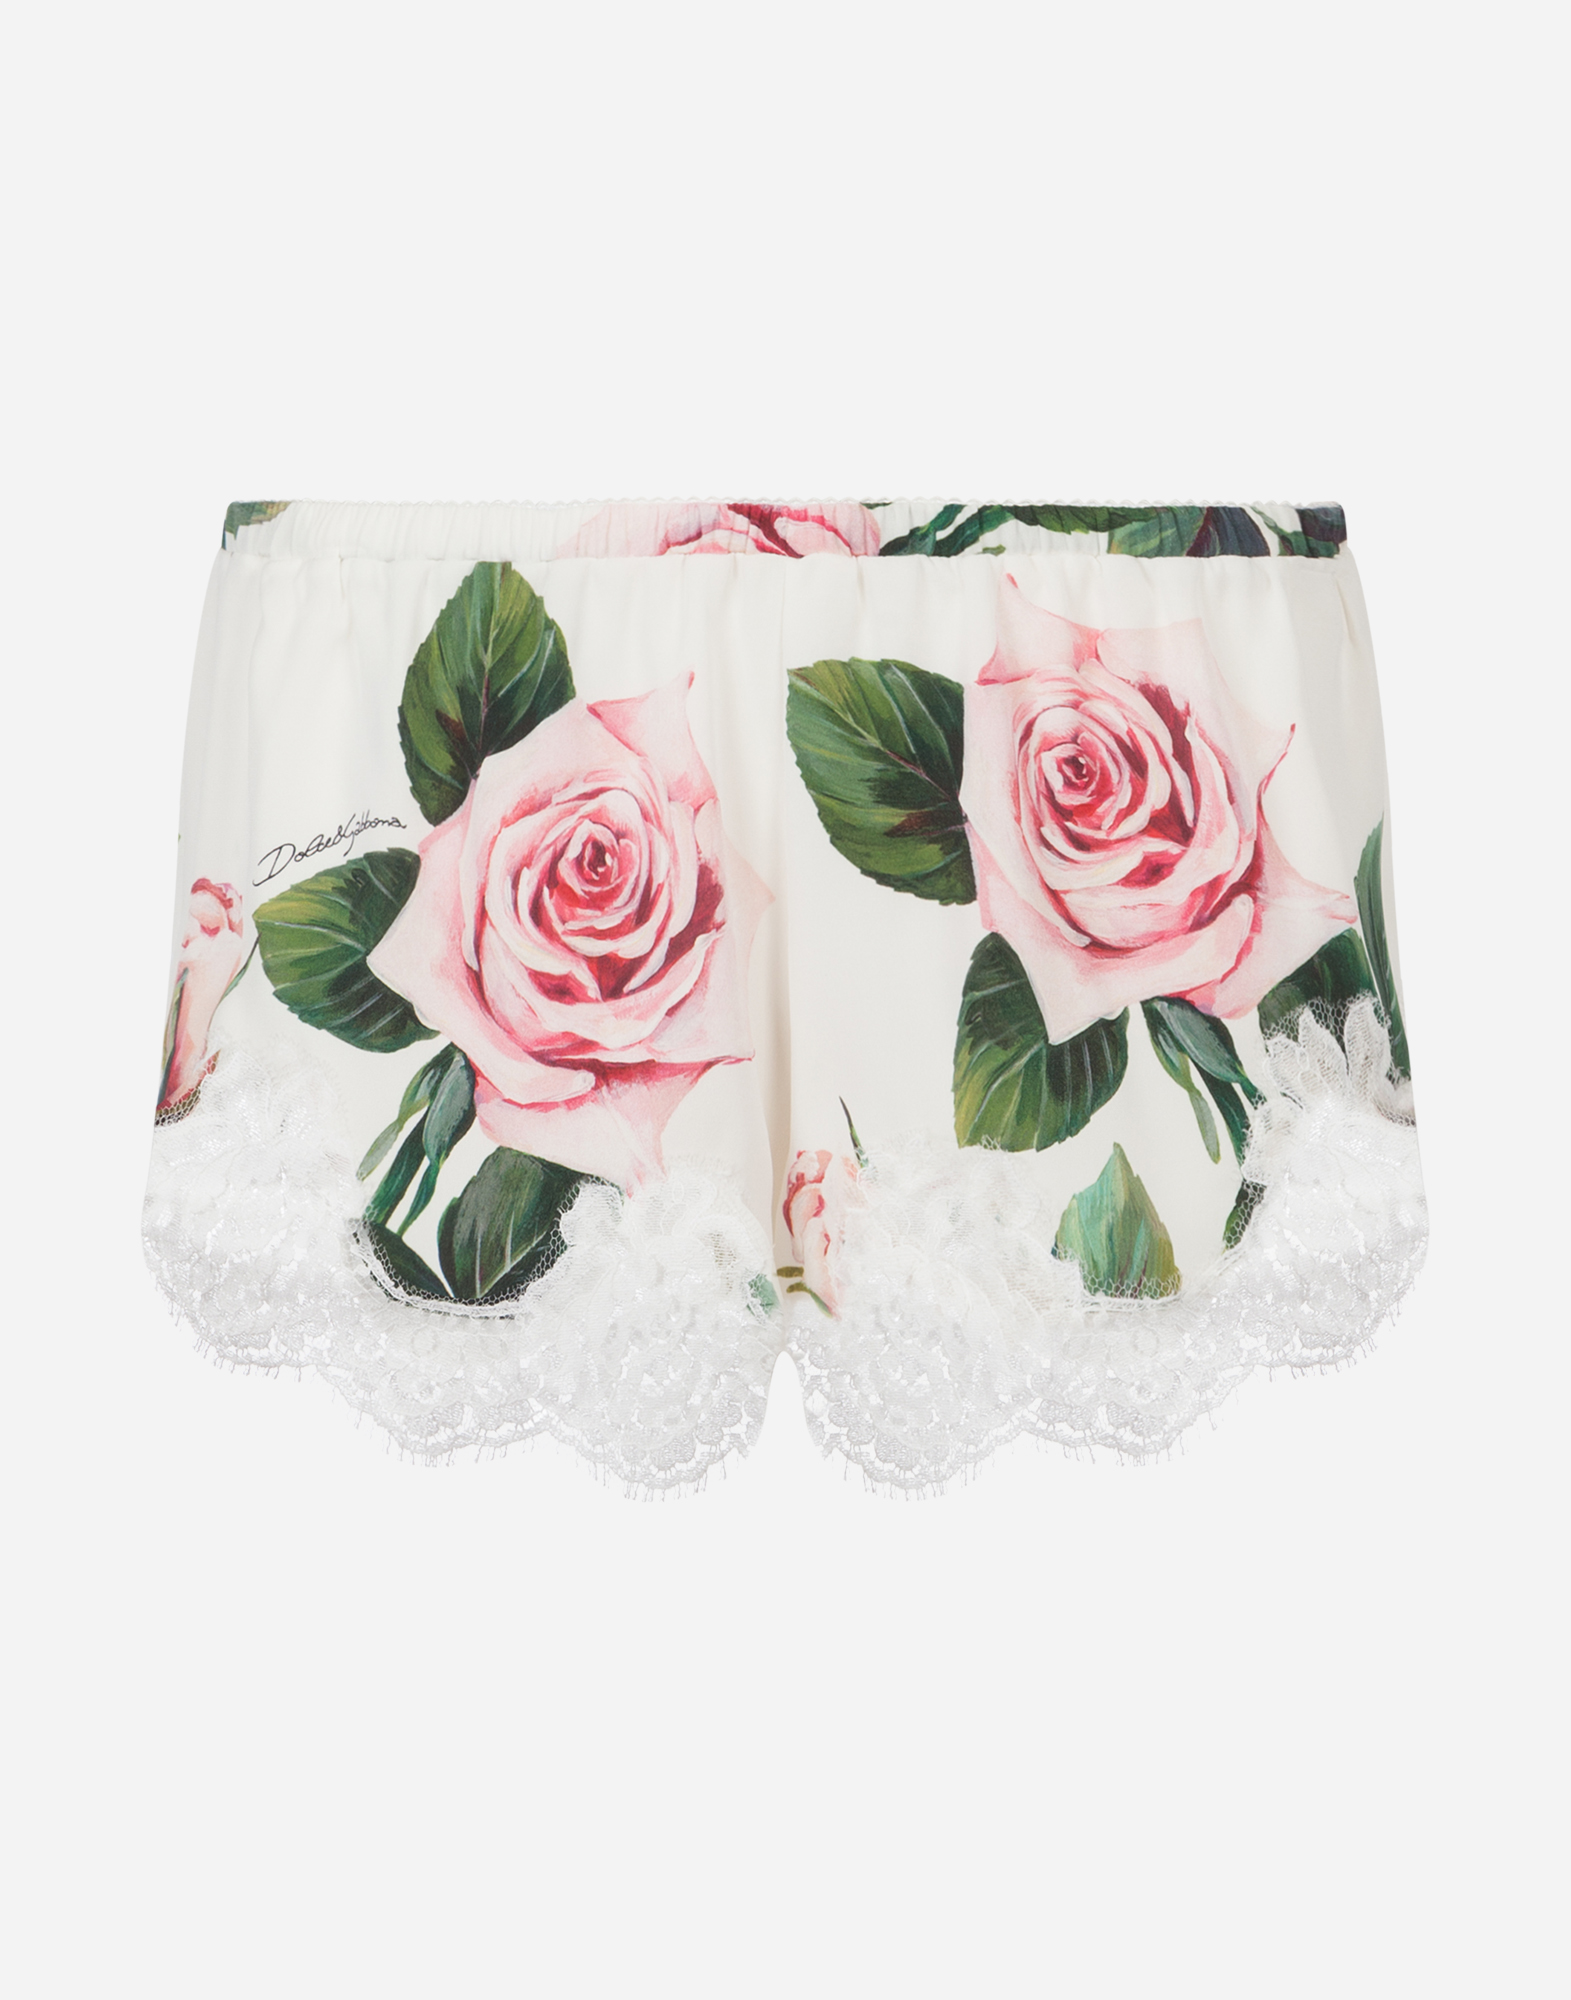 DOLCE & GABBANA SATIN LINGERIE SHORTS WITH TROPICAL ROSE PRINT AND LACE